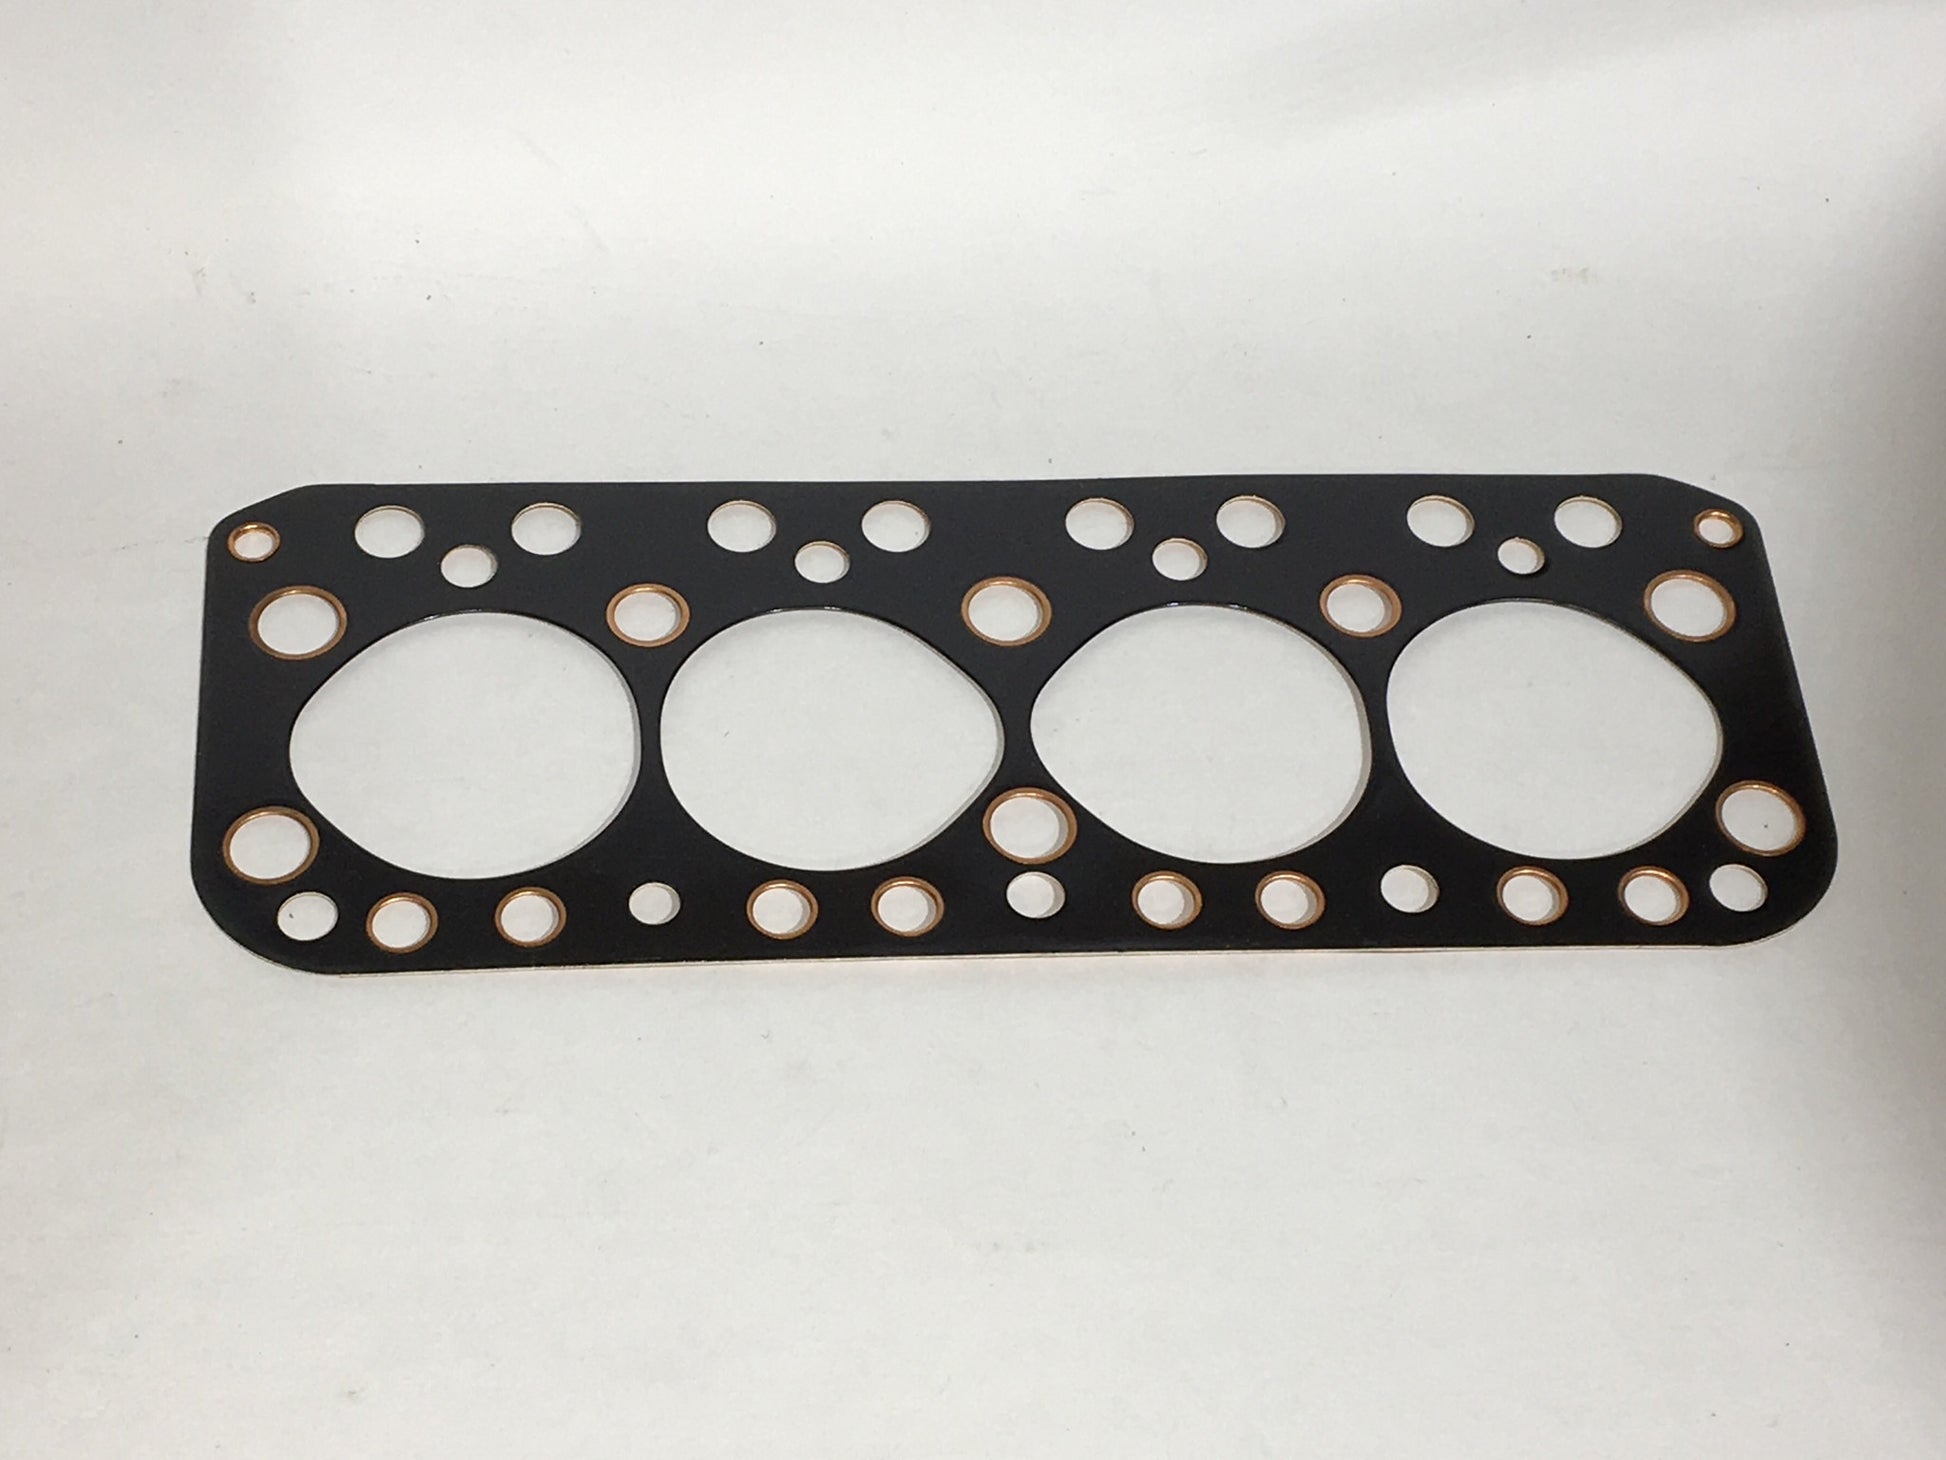 Miniature of a Head Gasket for Austin Mini 1275 Keychain Stainless Steel  brushed – DisagrEE